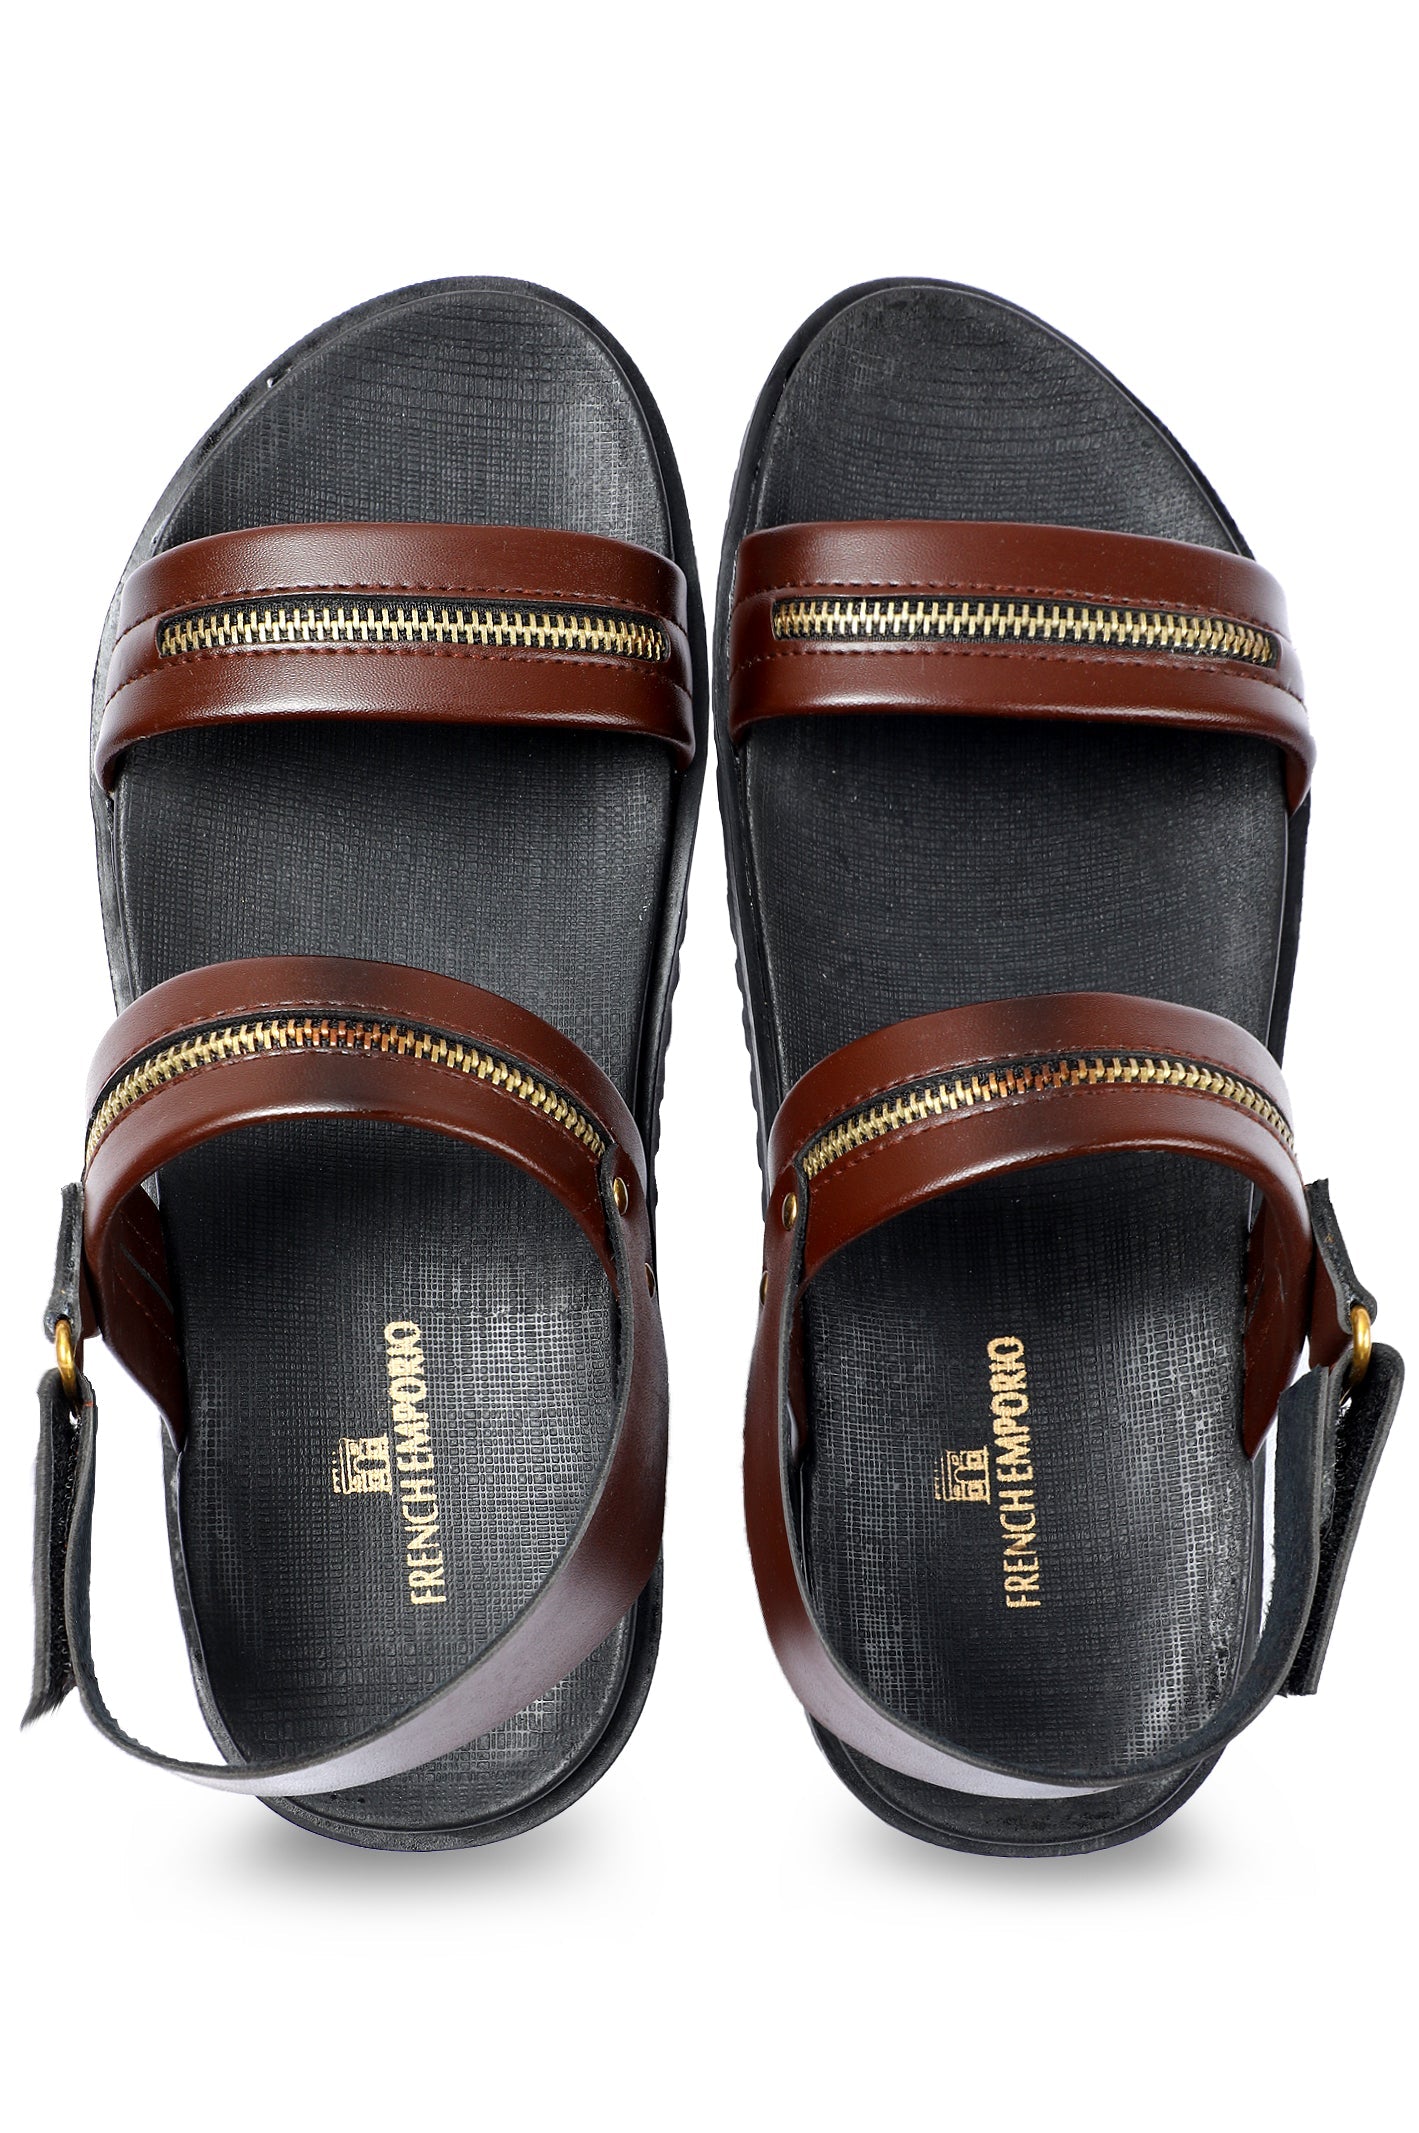 French Emporio Men's Sandal SKU: SLD-0043-BROWN - Diners